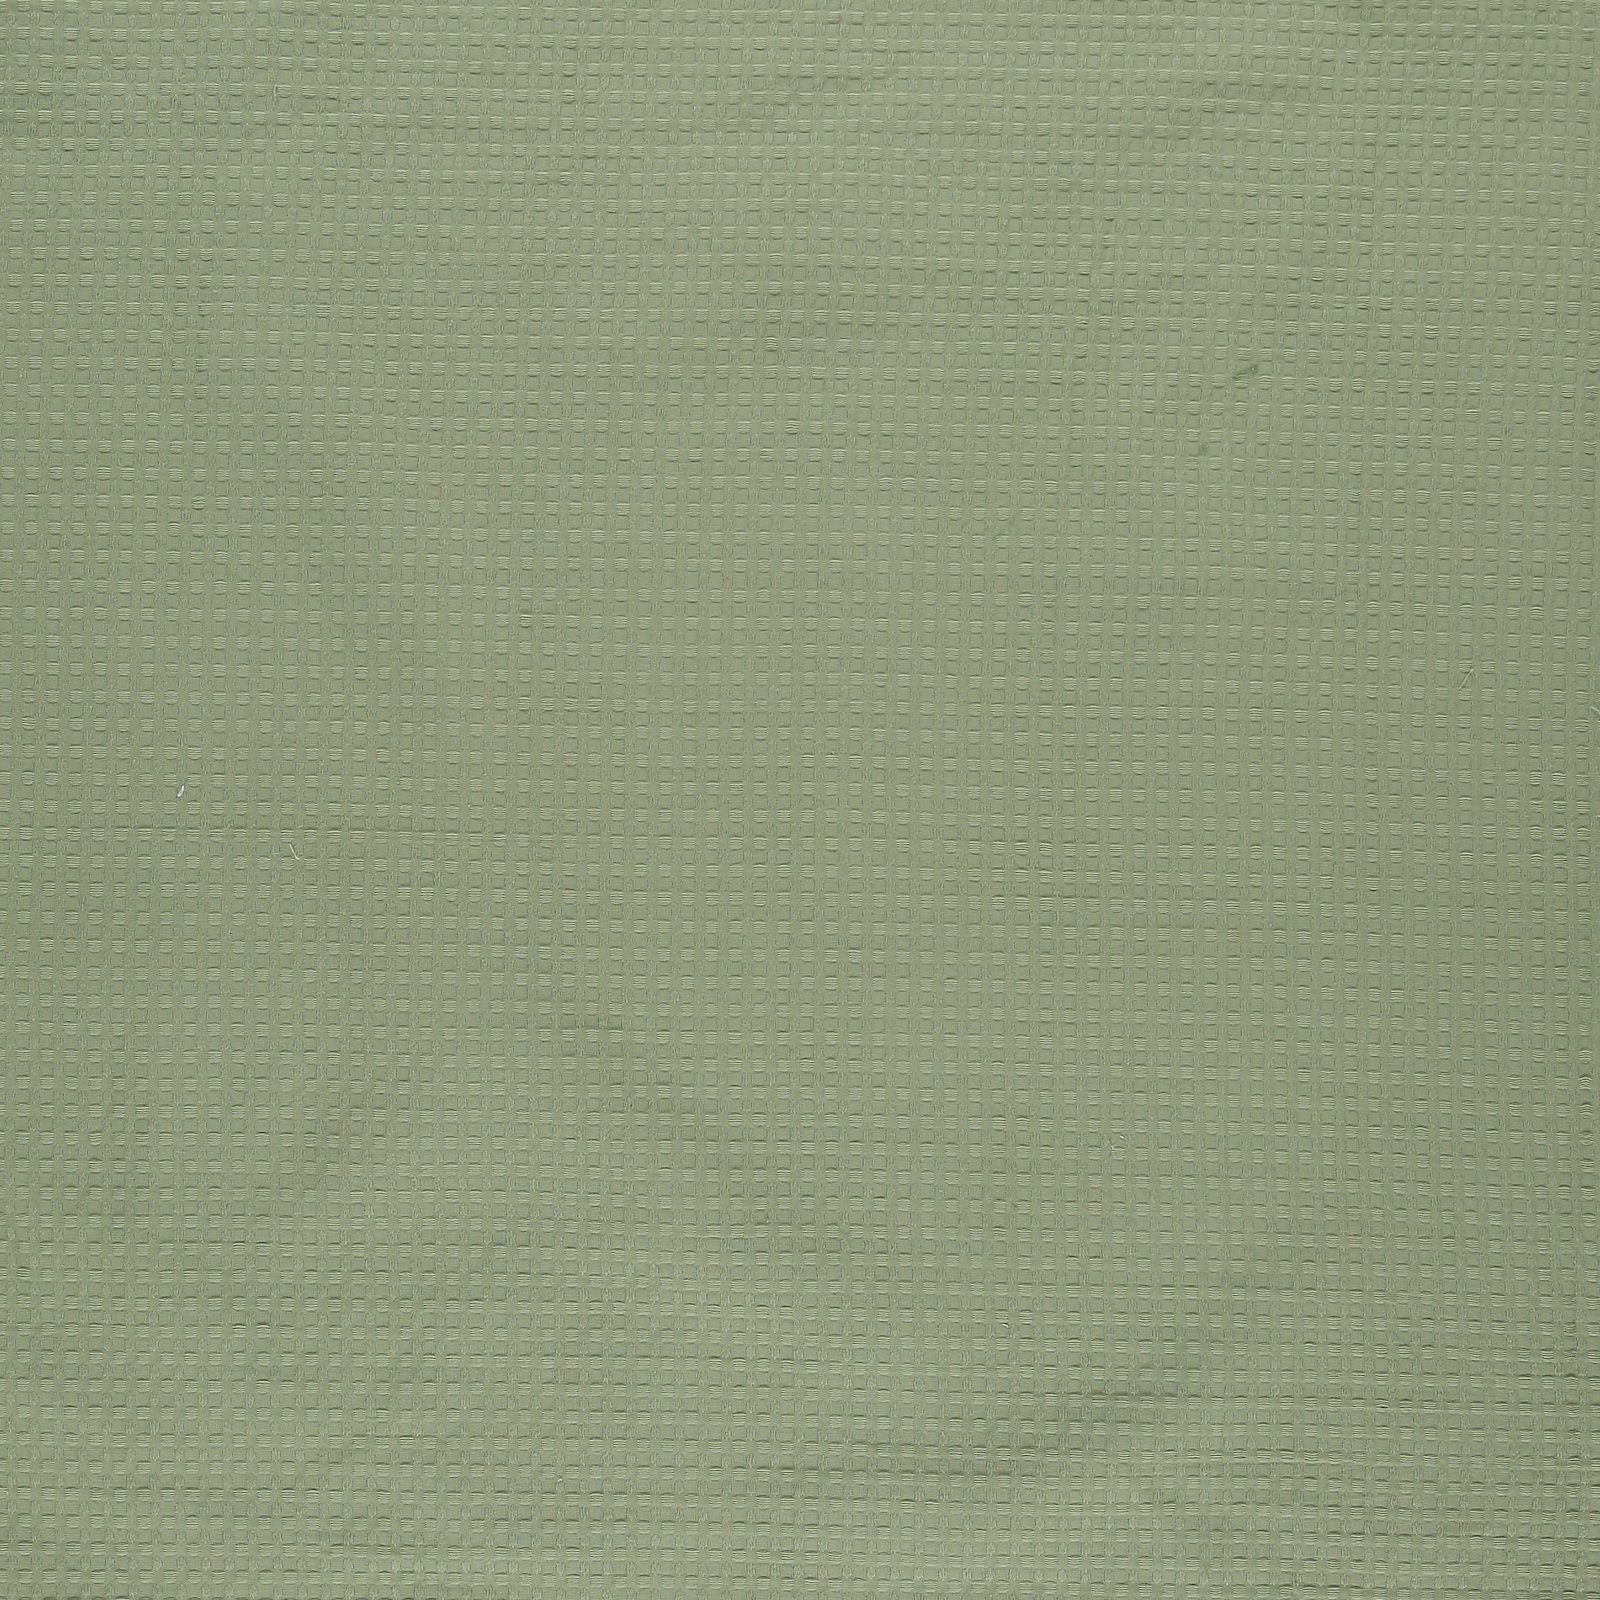 Woven jacquard light green w structure 501728_pack_solid